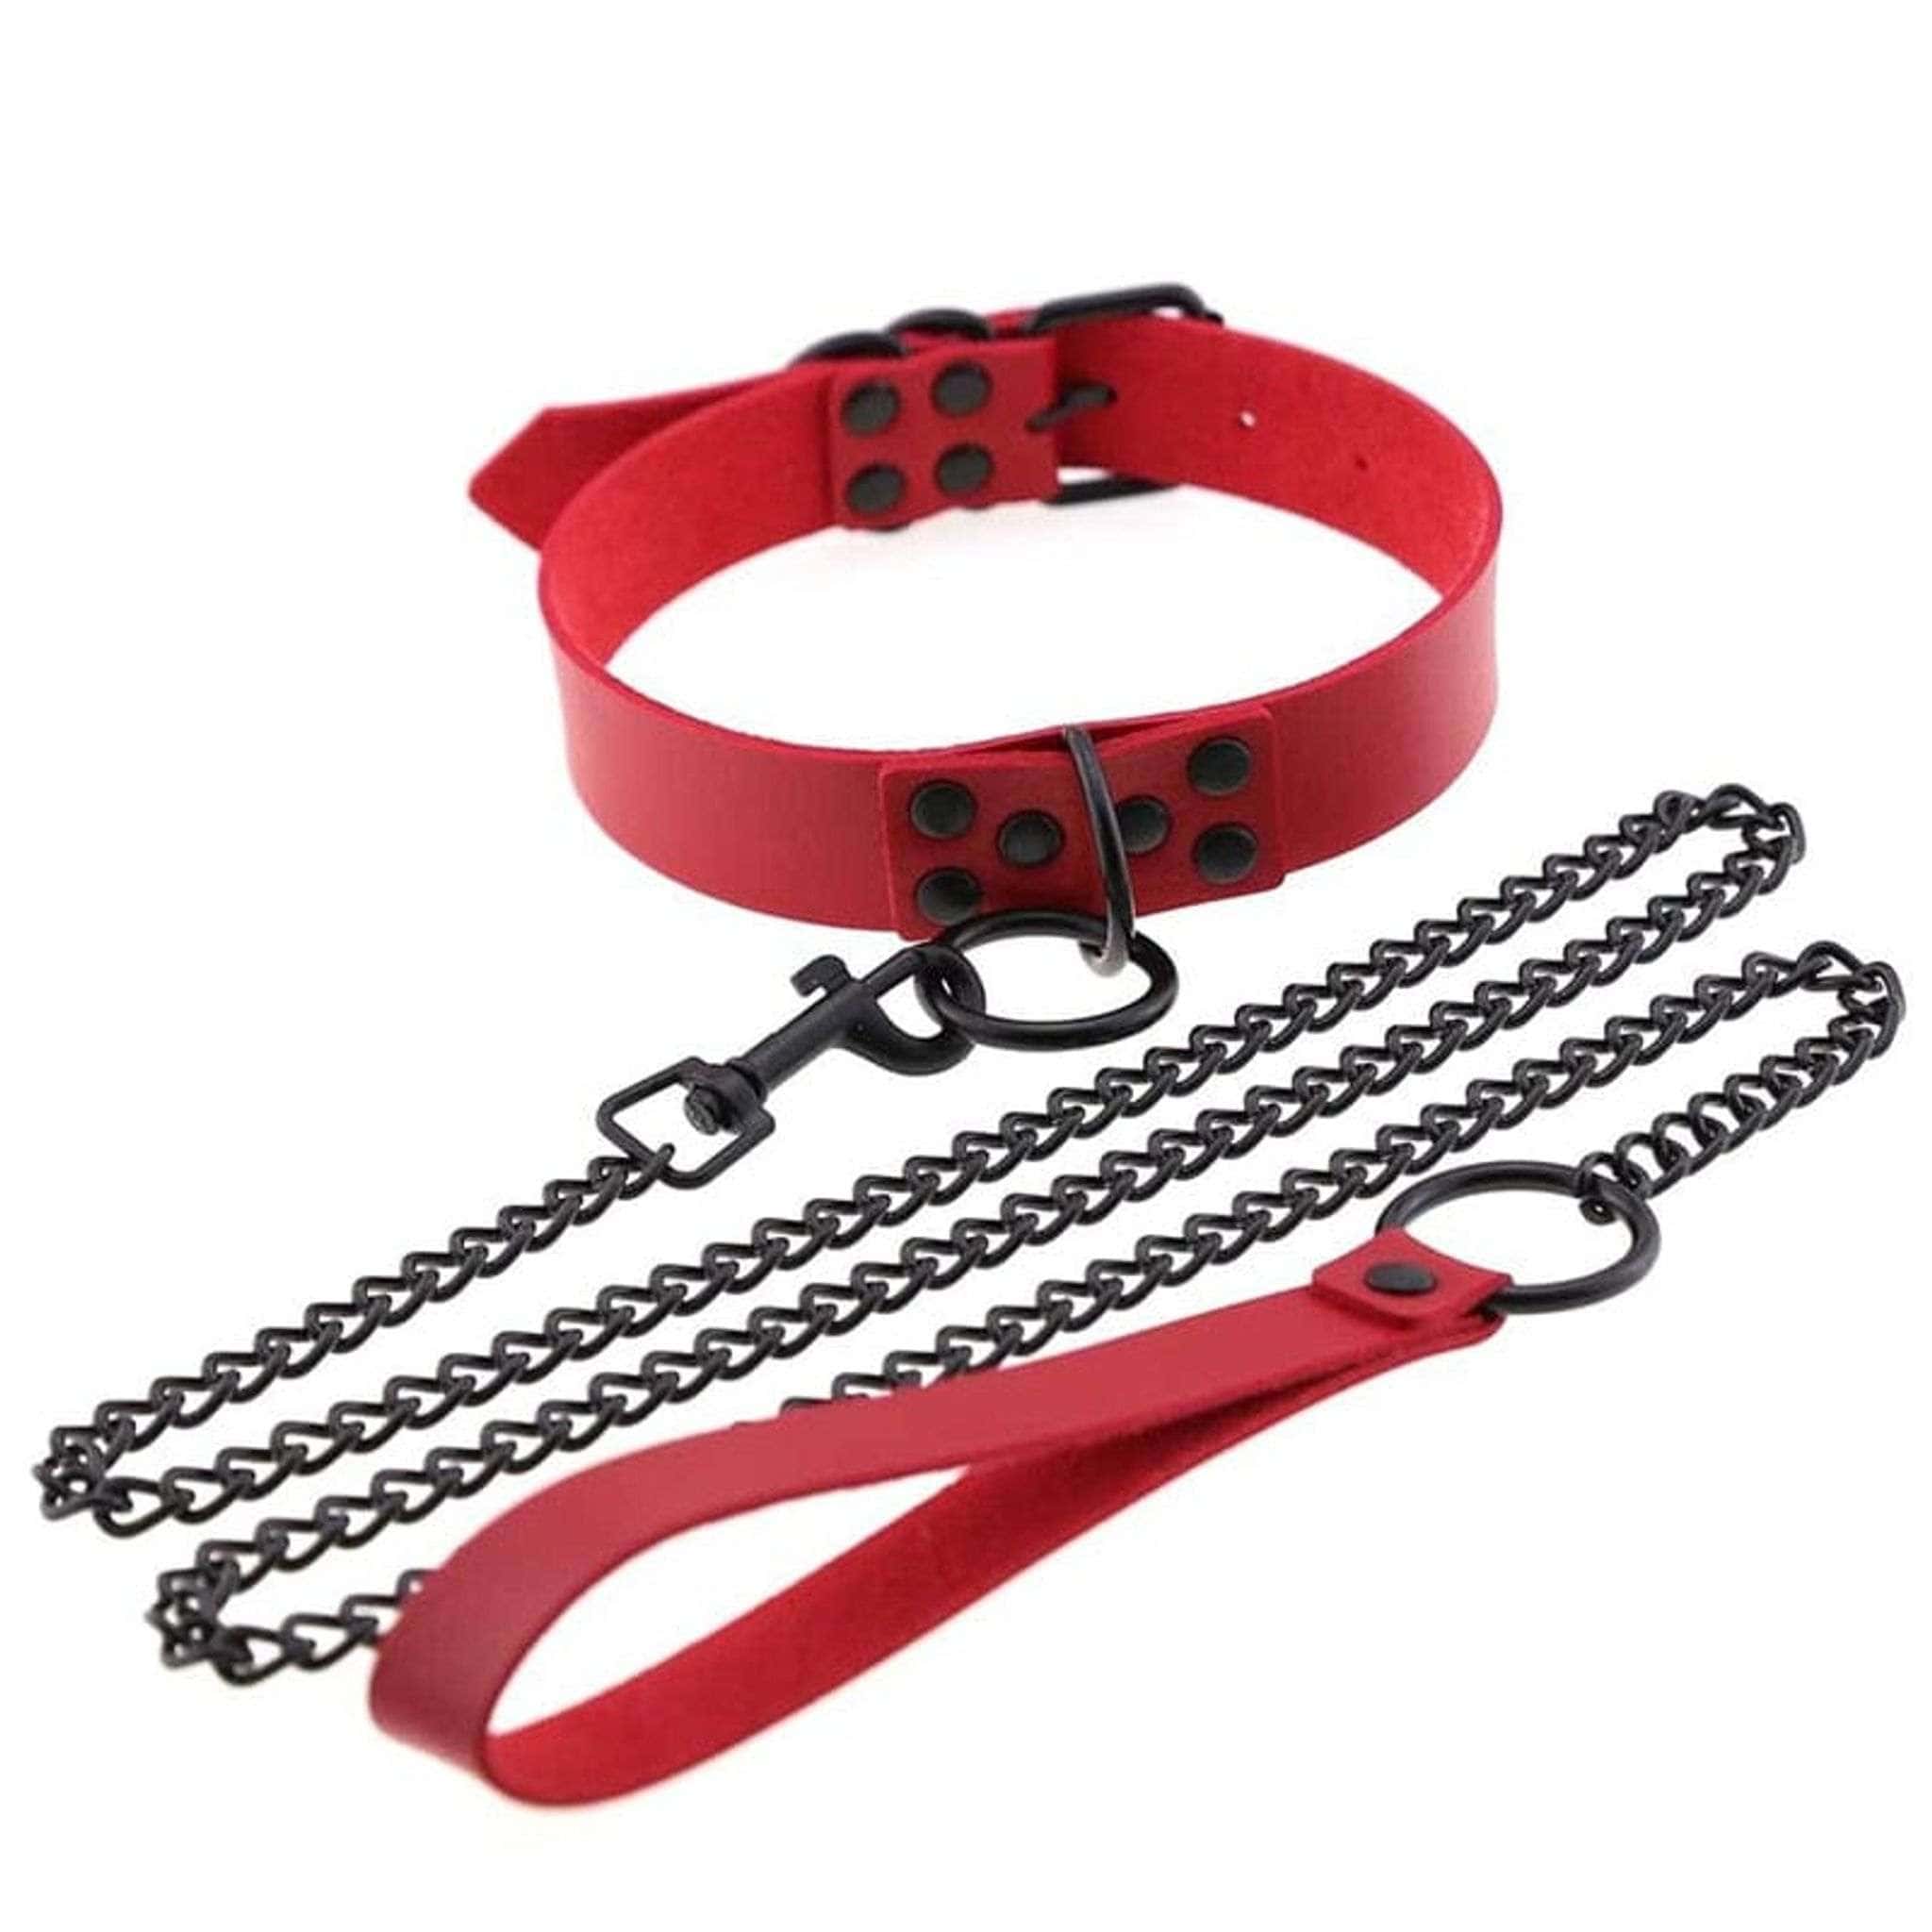 Drezden Goth Gothic Punk Chokers With Leash